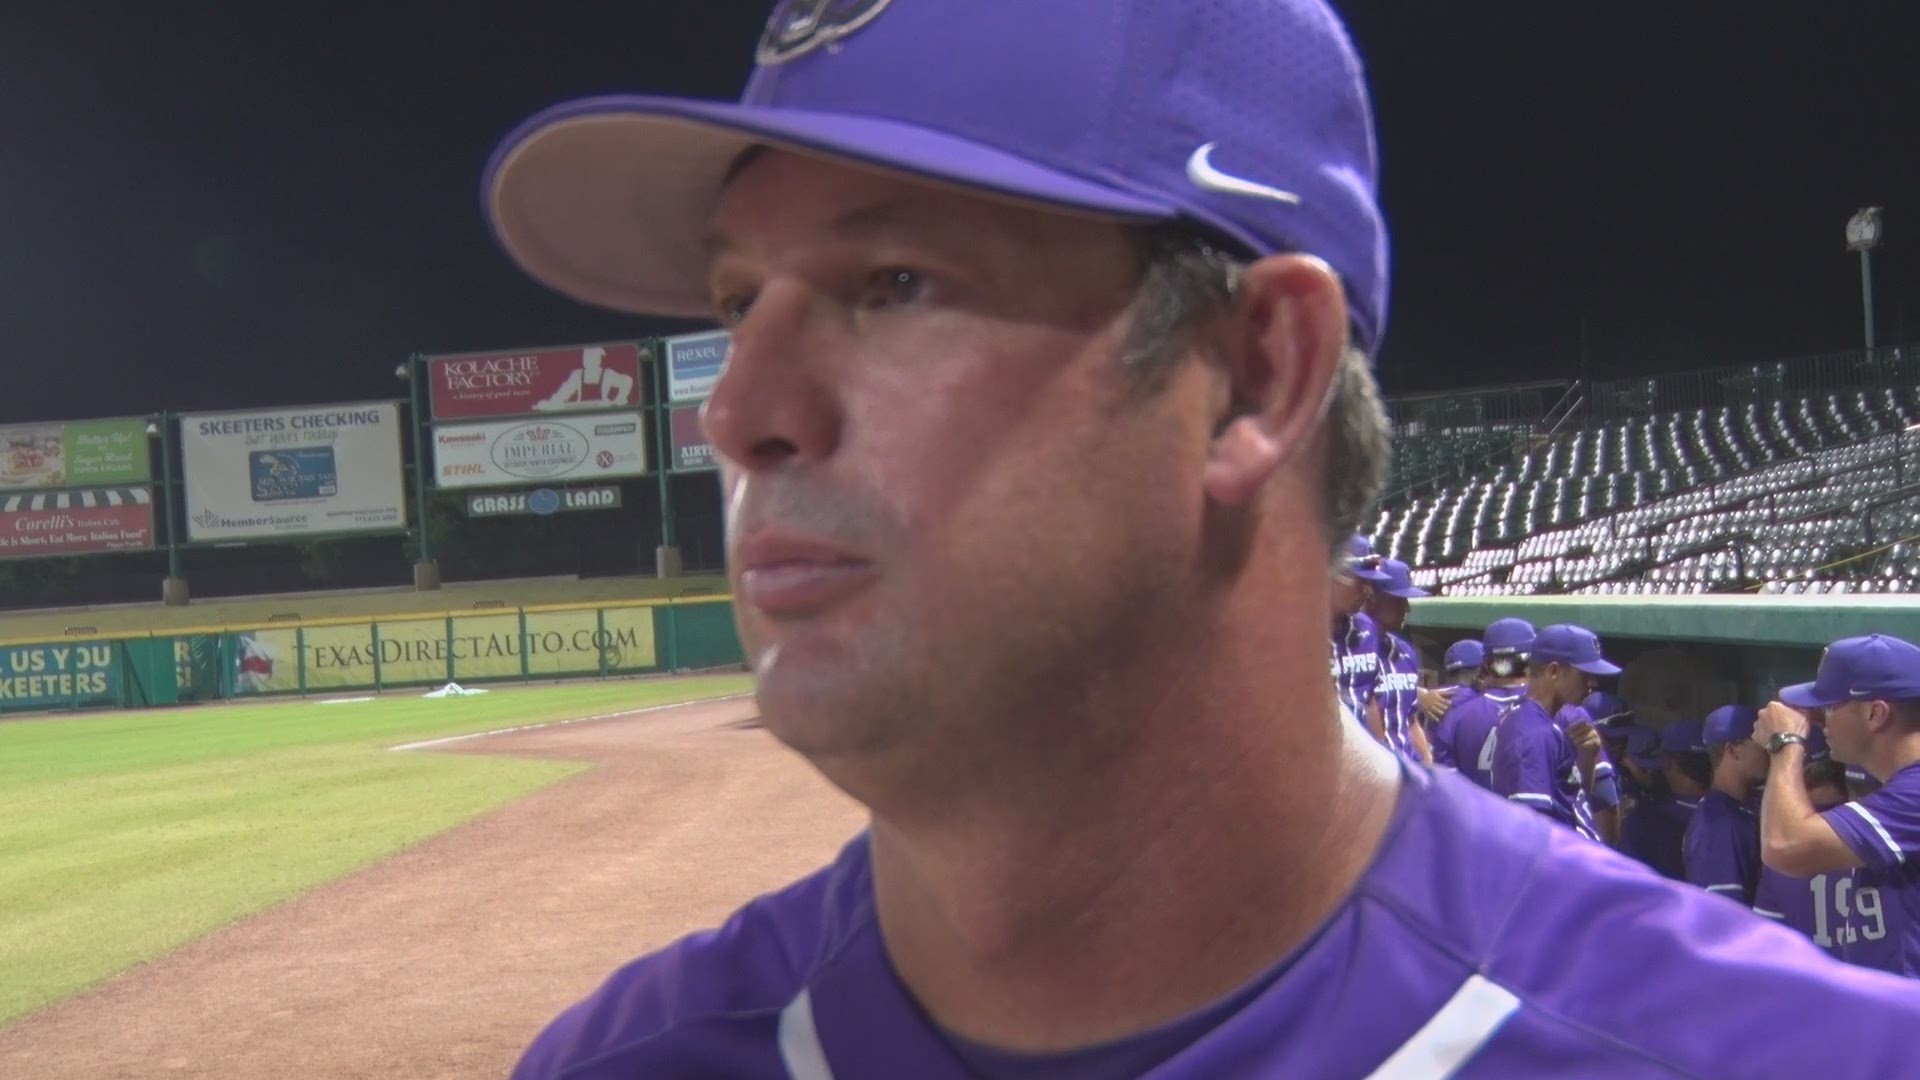 Allen Gum reflects on the Bears 4-2 loss to McNeese State in the Southland Conference Tournament championship game